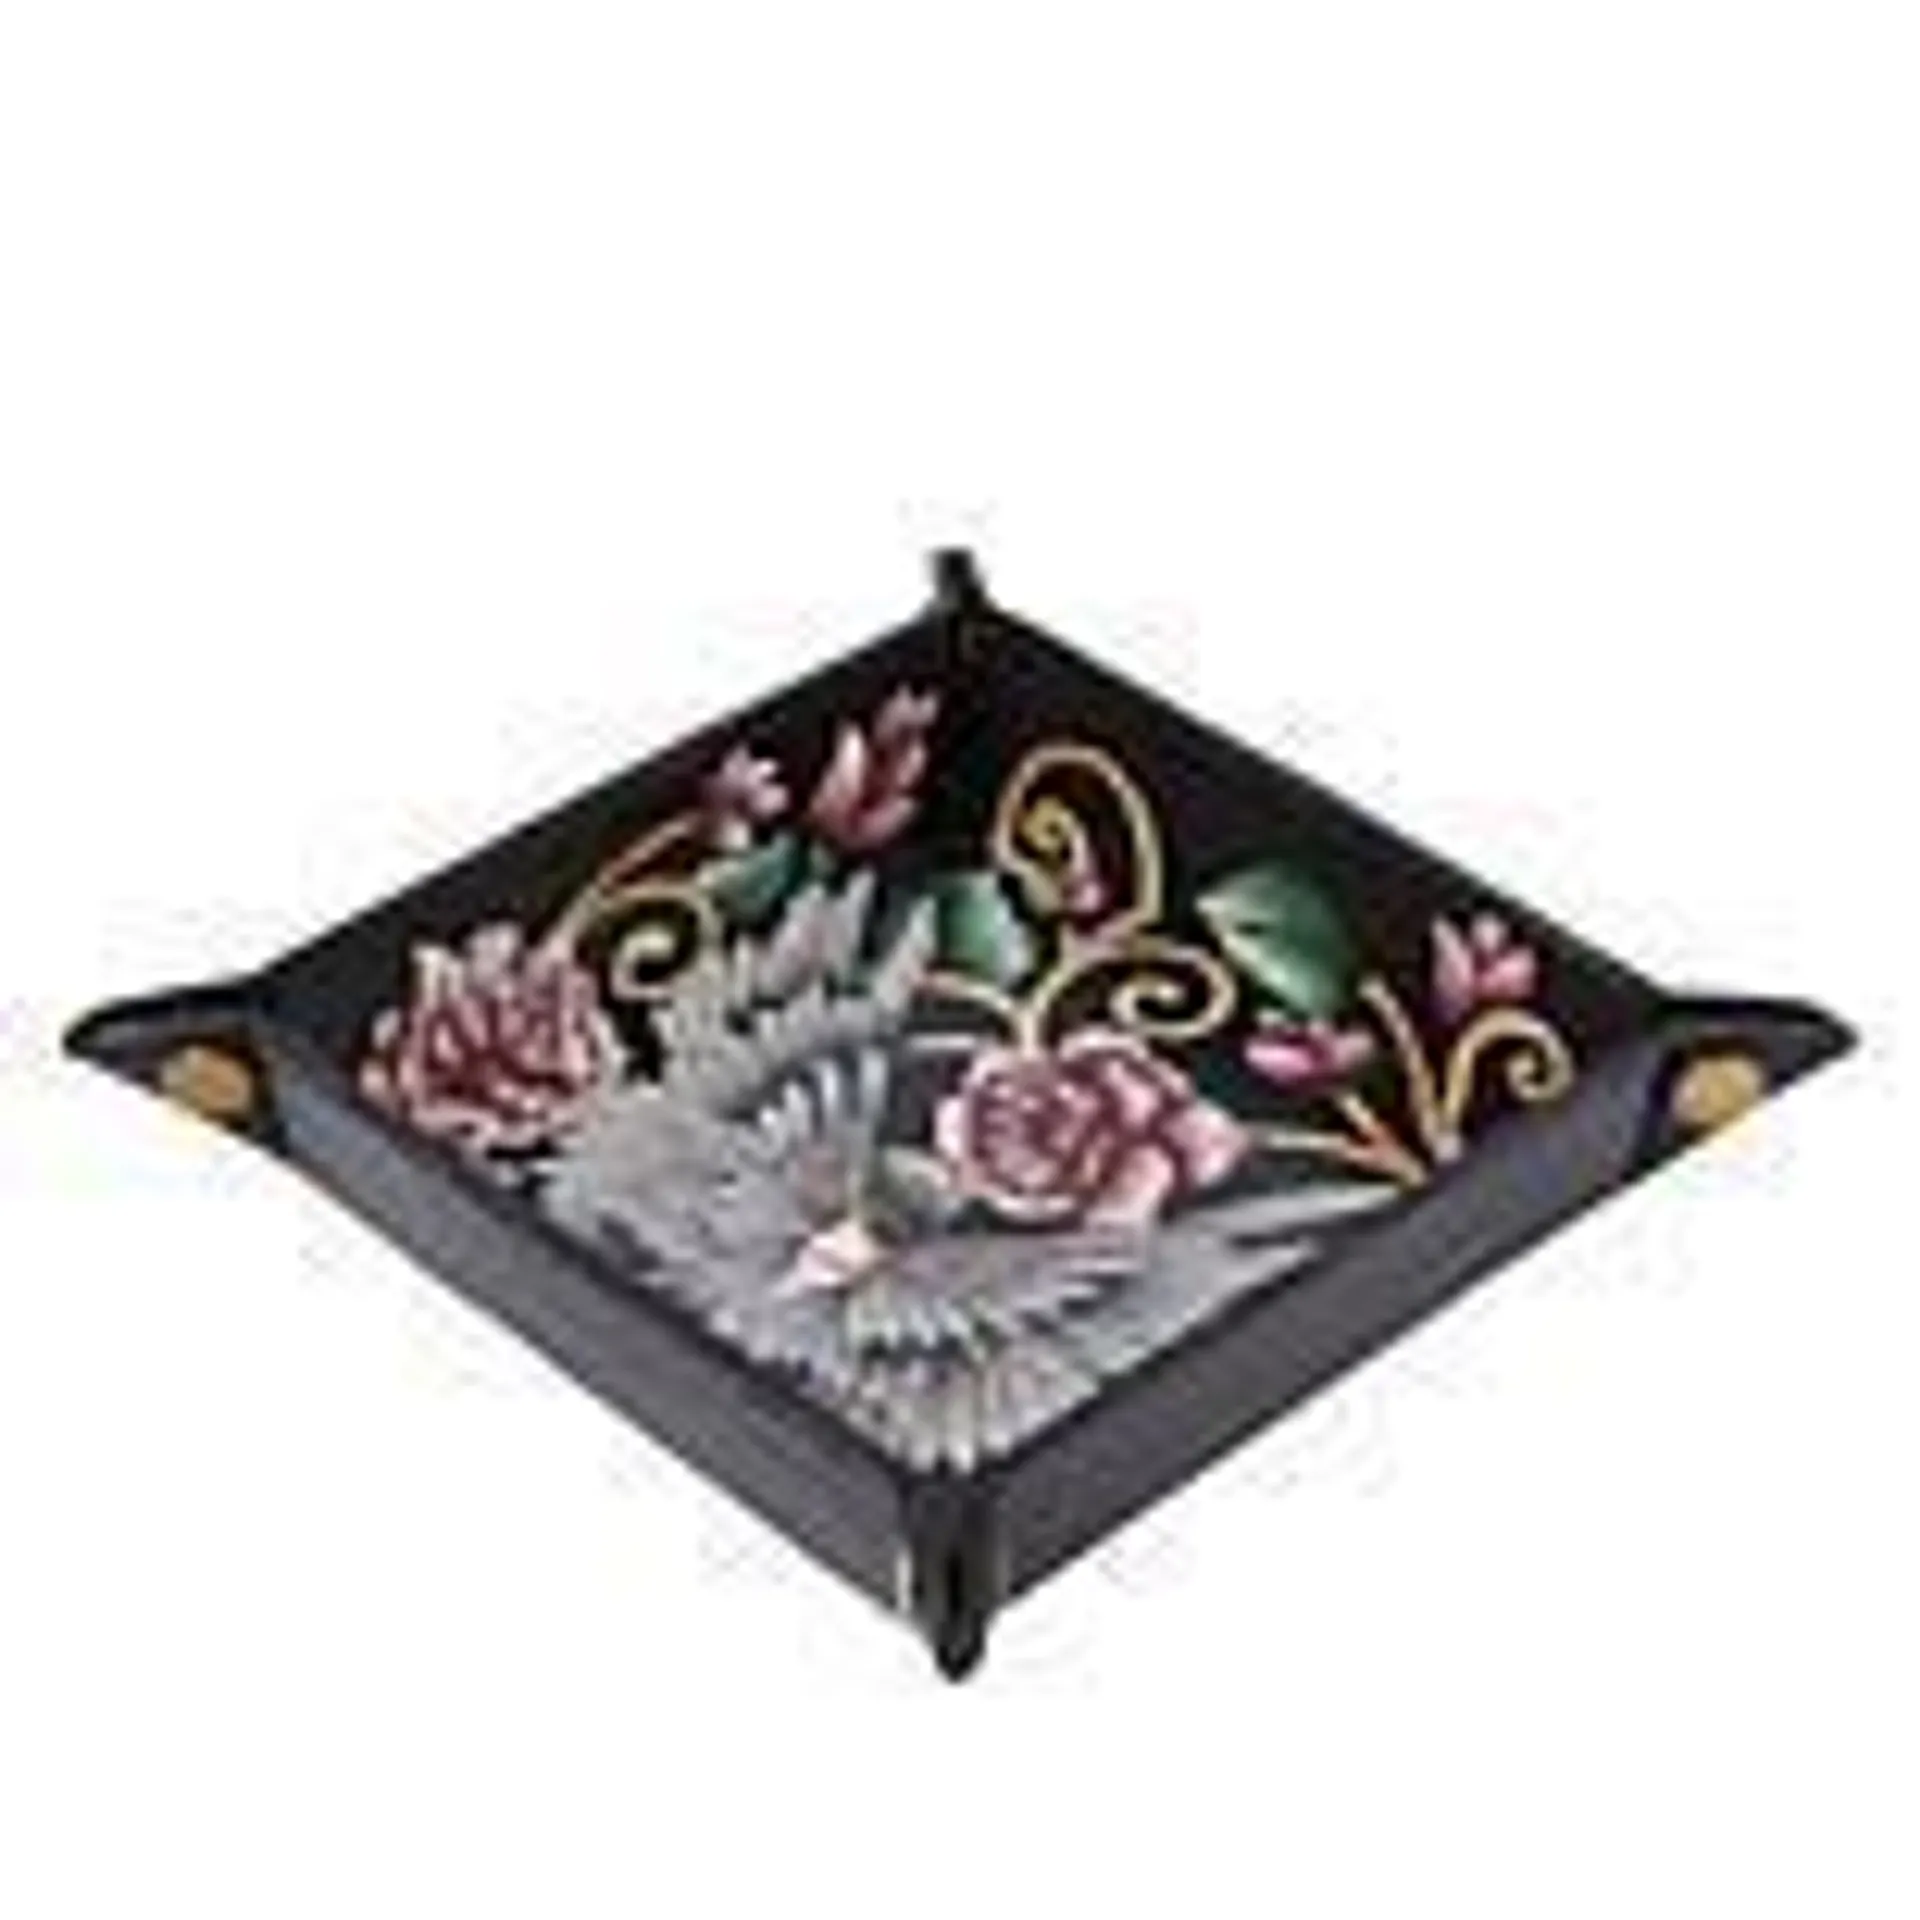 Anuschka Hand-Painted Leather Small Catch-All Tray